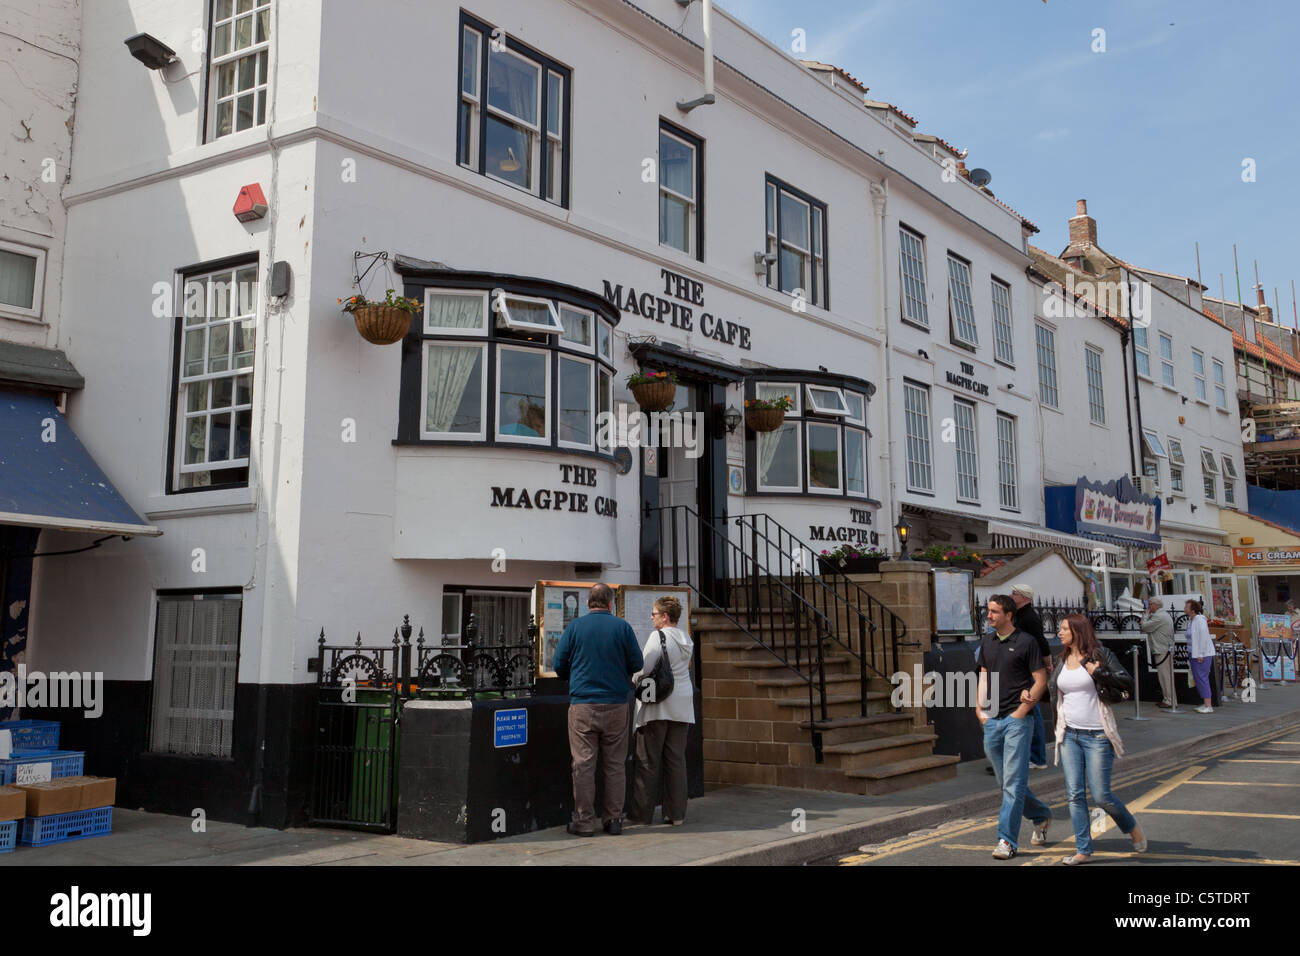 The Magpie Cafe,a fish and chip shop and restaurant in Whitby, North Yorkshire Stock Photo